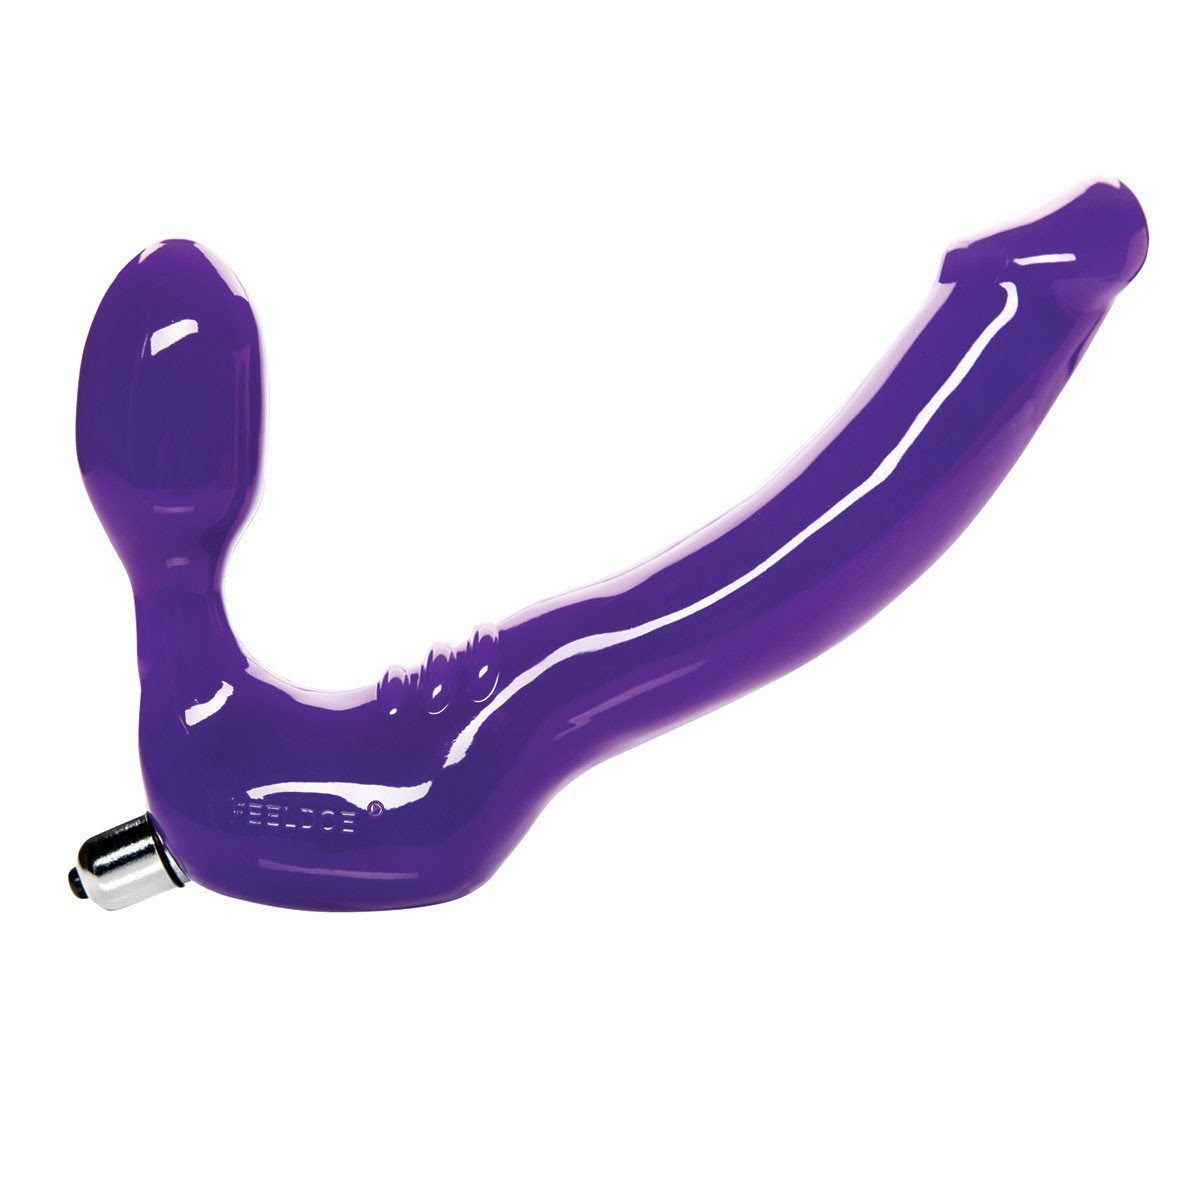 Feeldoe Classic Strapless Dildo free shipping - Beyond Delights